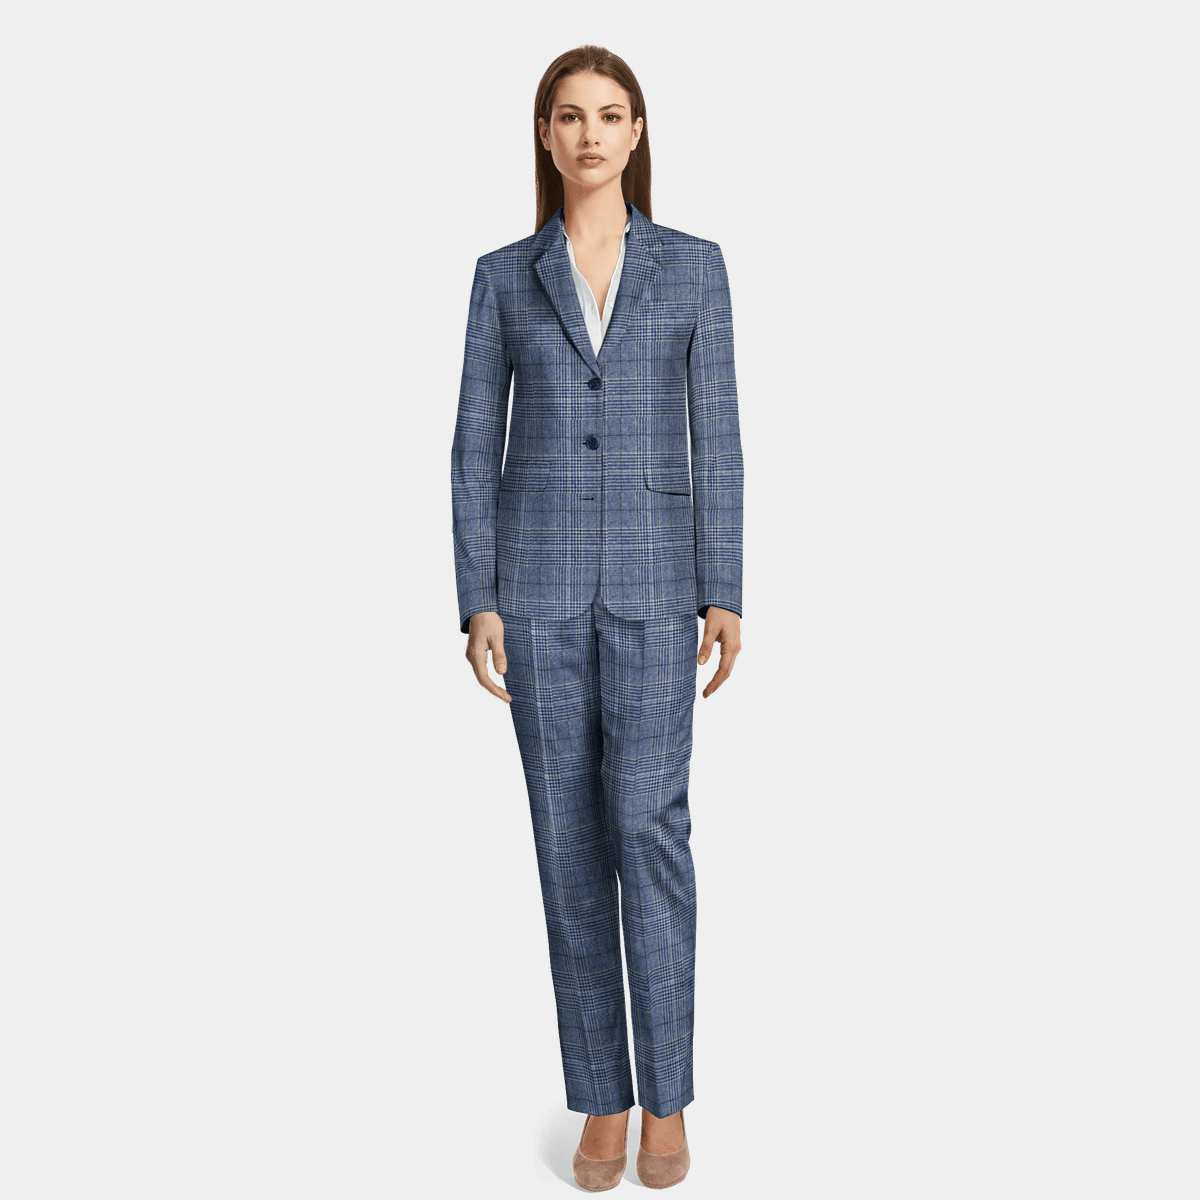 Blue 3 button Plaid Tweed Woman Suit - relaxed fit | Sumissura